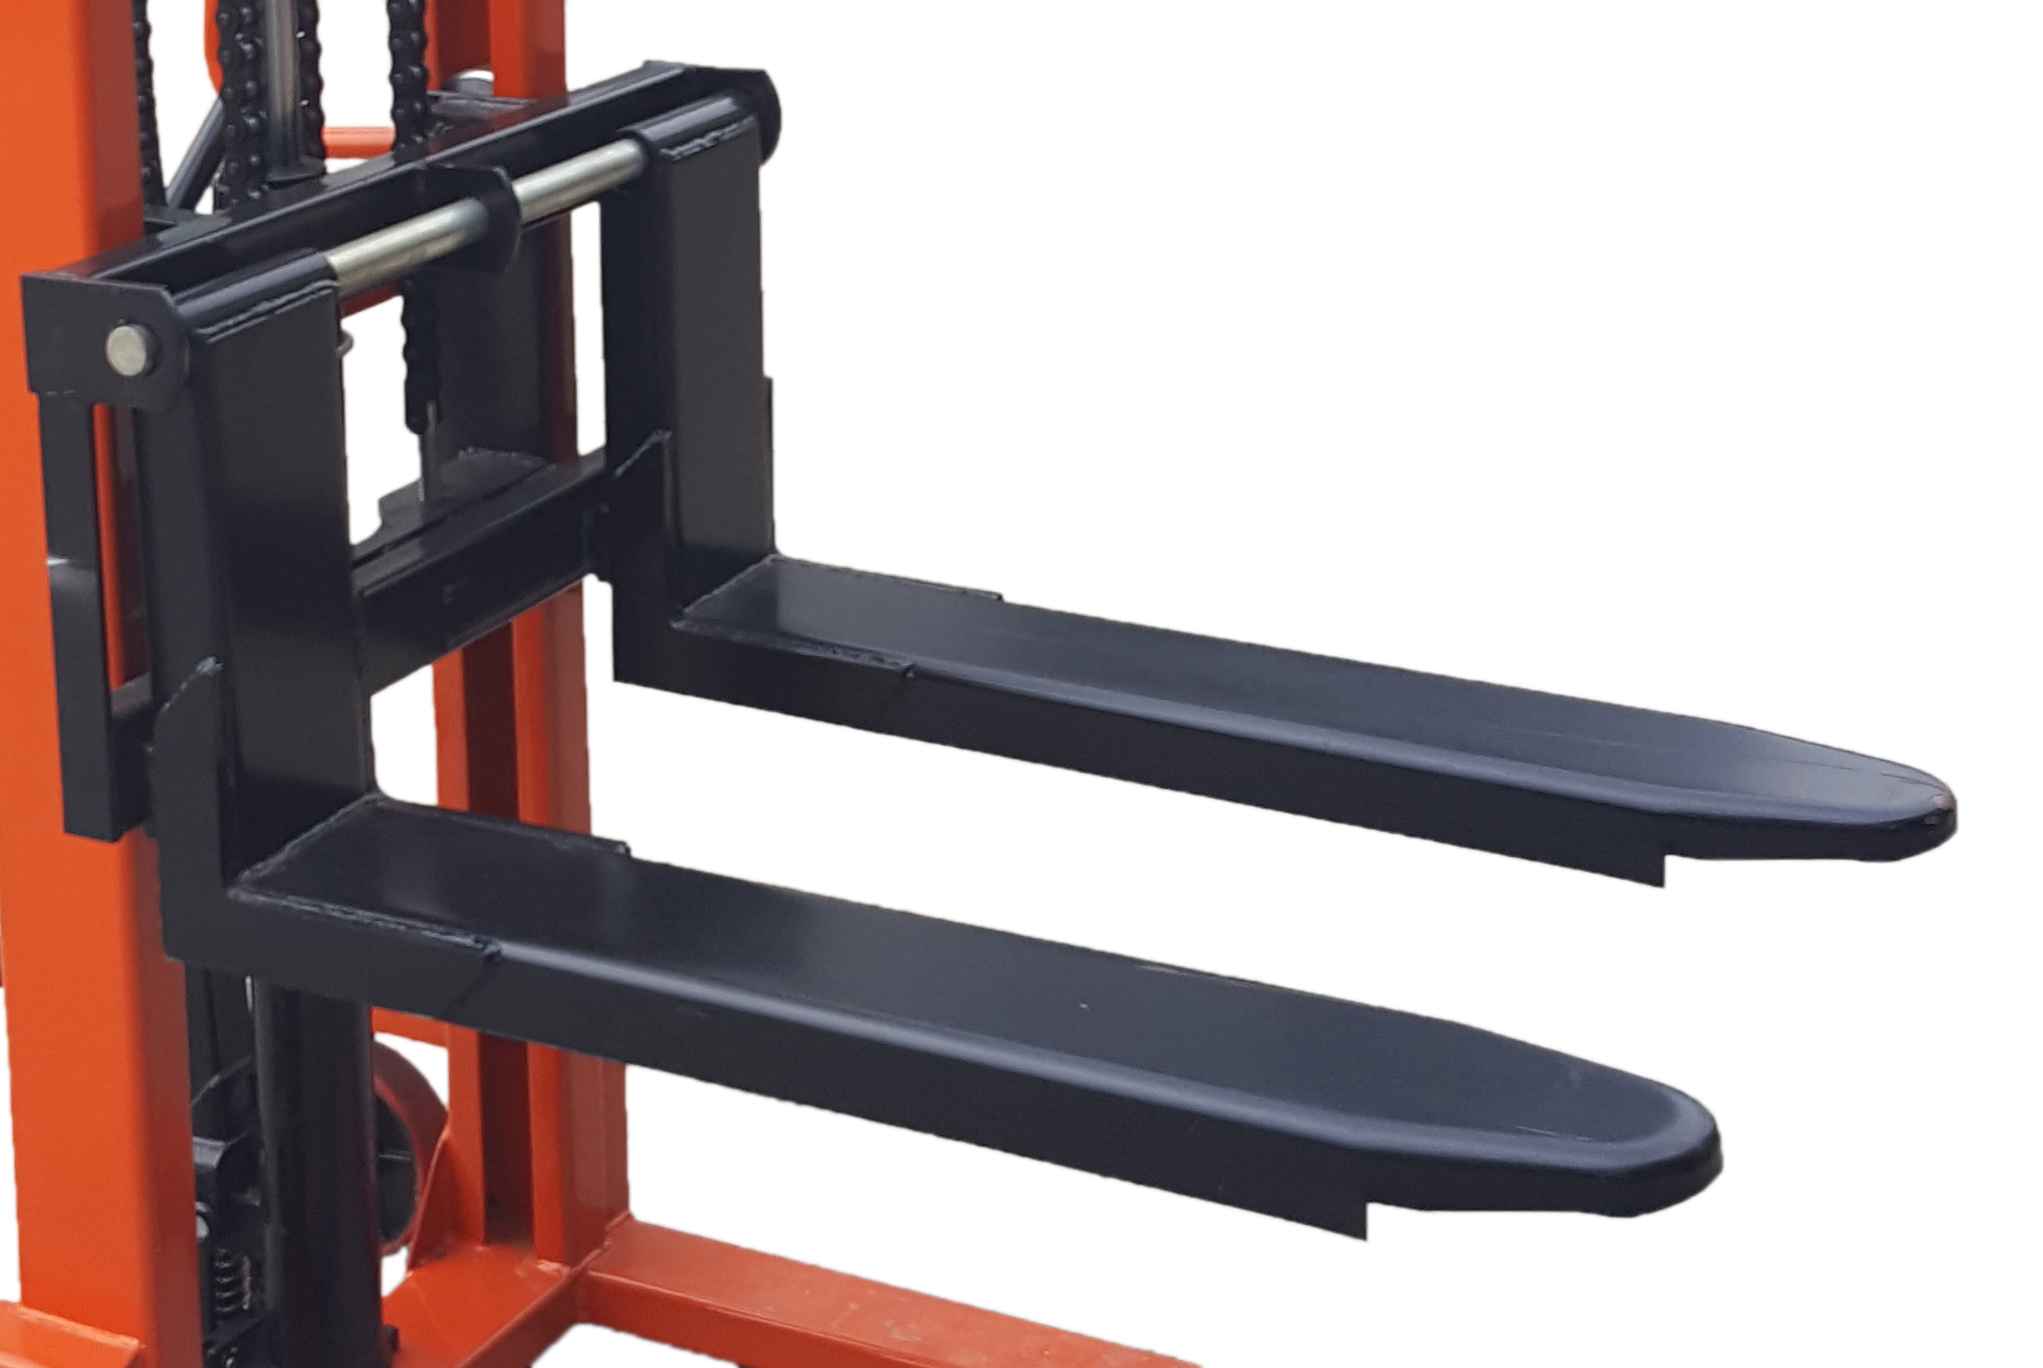 Empilhadeira Manual Hydraulic Forklift Hand Lift Stacker Pallet Lifter Trolley Truck